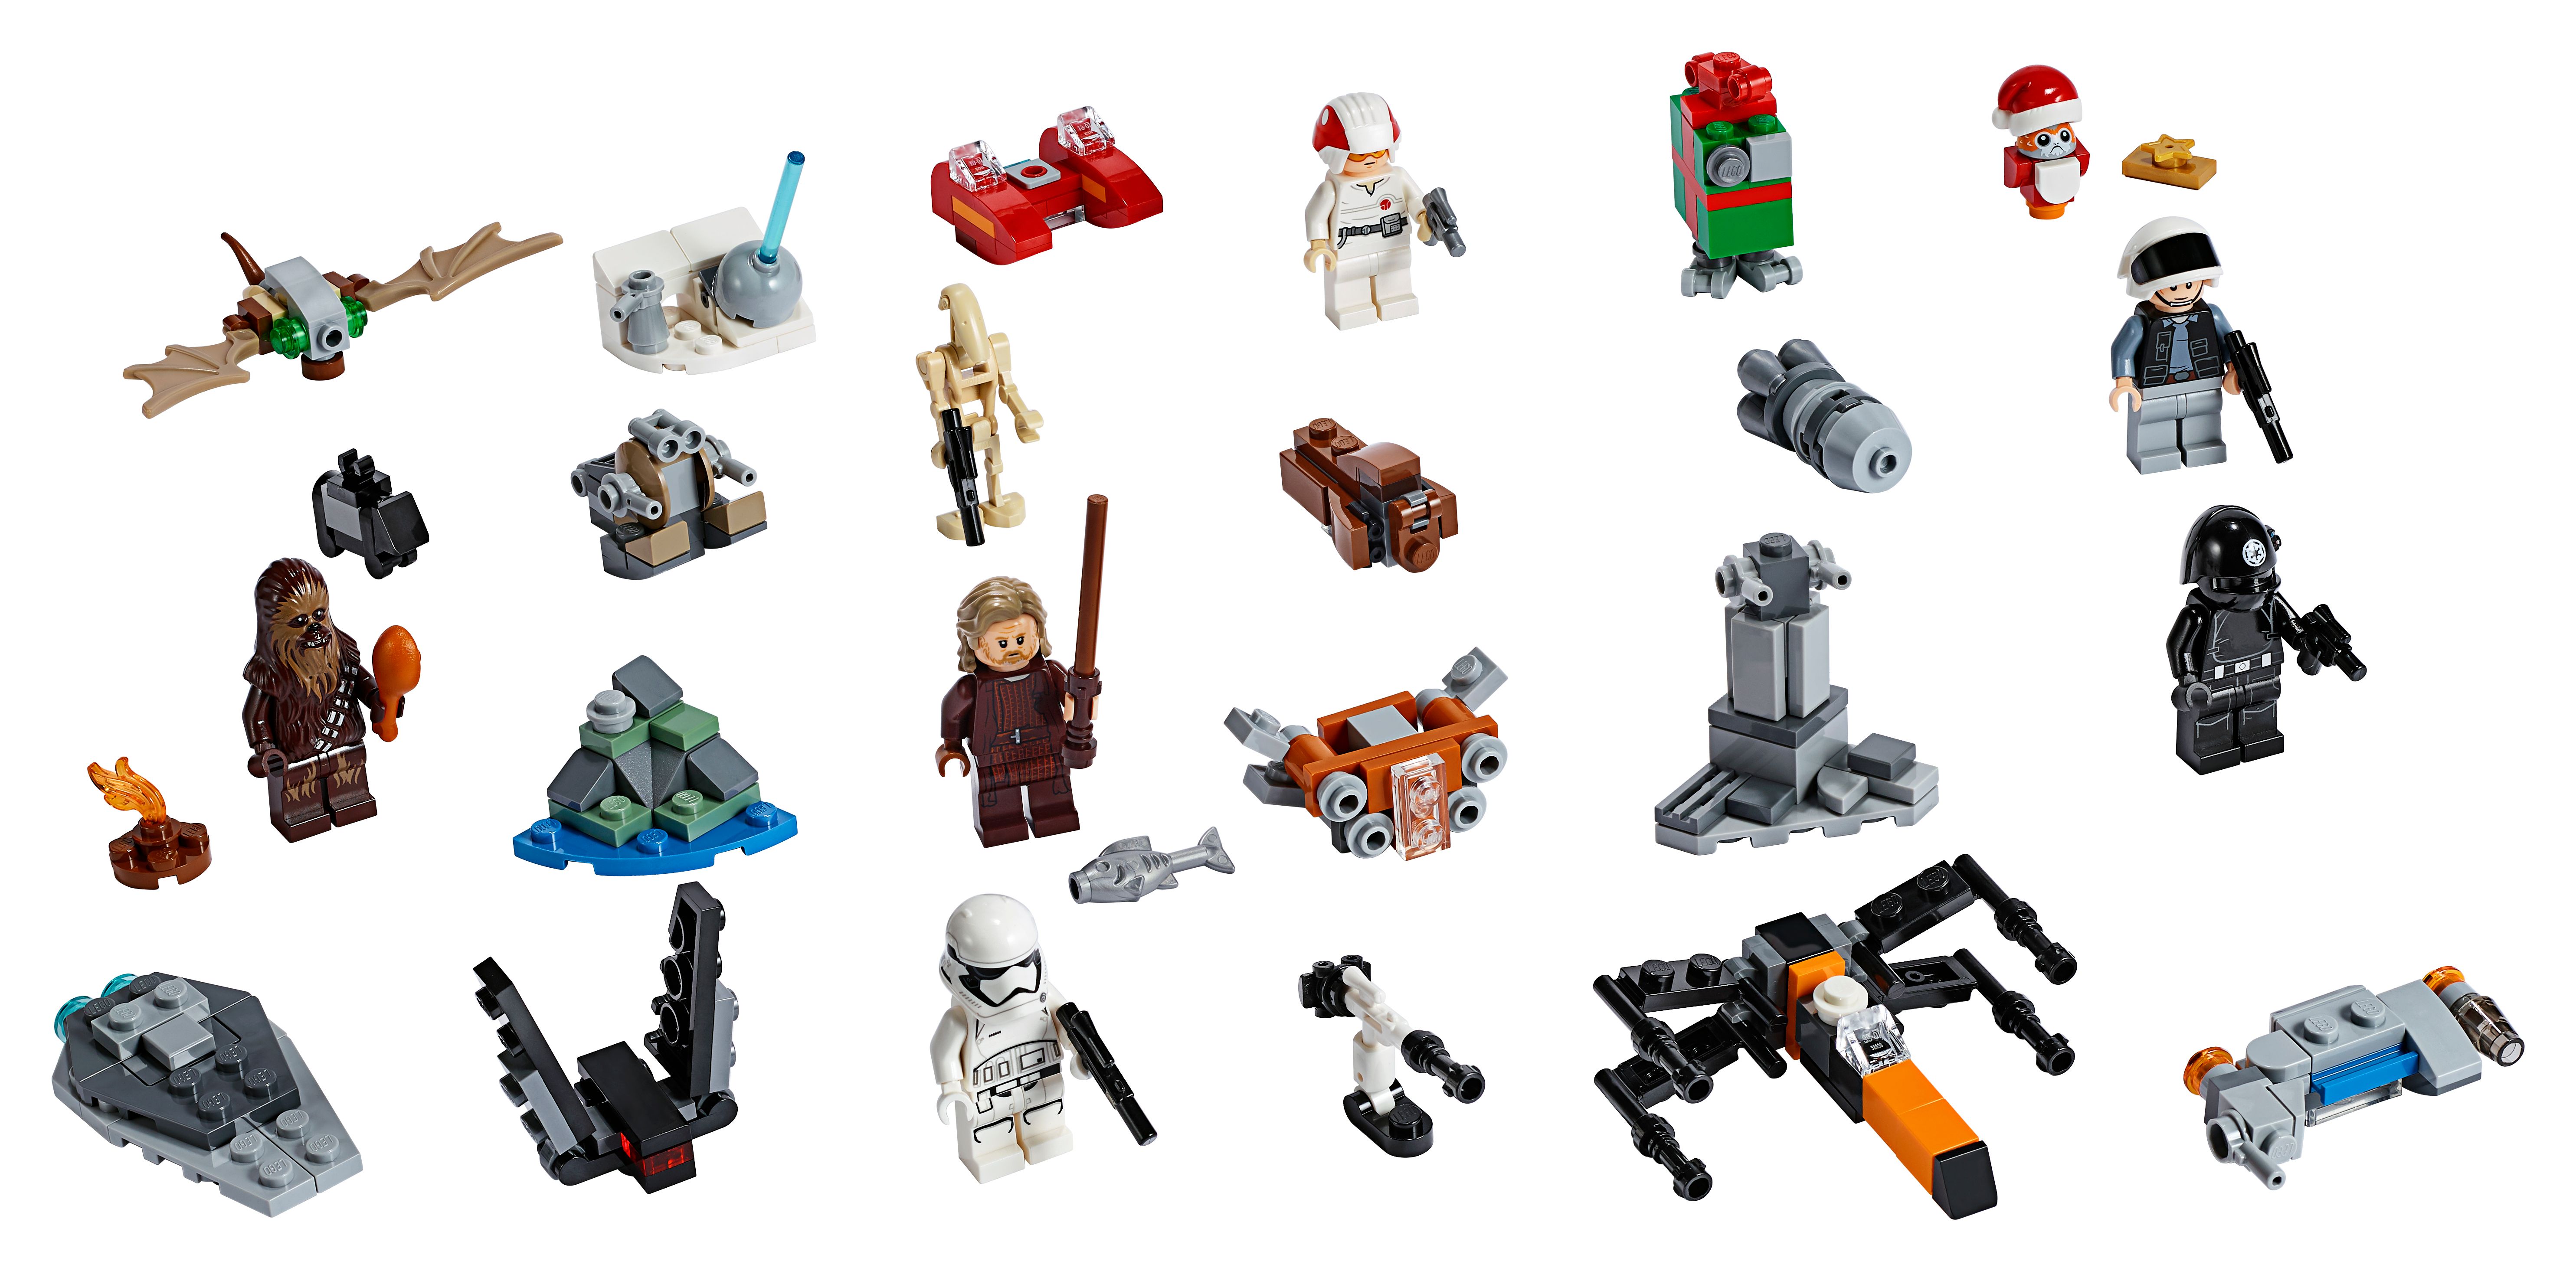 LEGO 75245 Star Wars Advent Calendar Building Kit (280 Pieces) - image 2 of 7